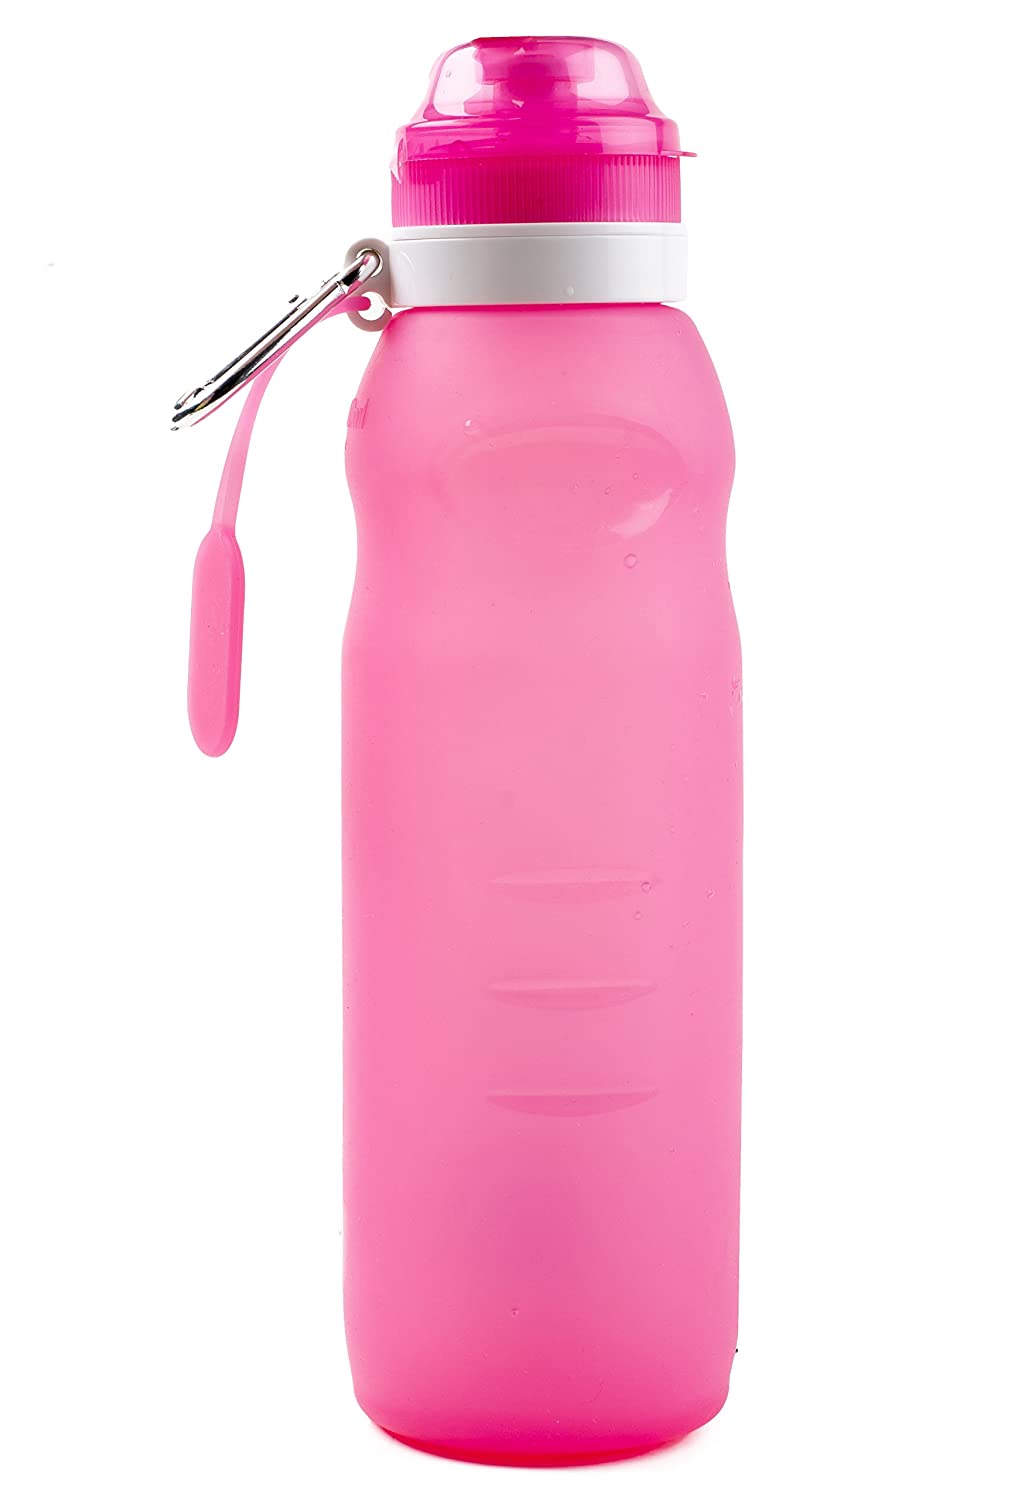 Importikaah Collapsible Silicone Water Bottle Sports Outdoor Travel Camping Foldable Bottle Canteen 20 Oz